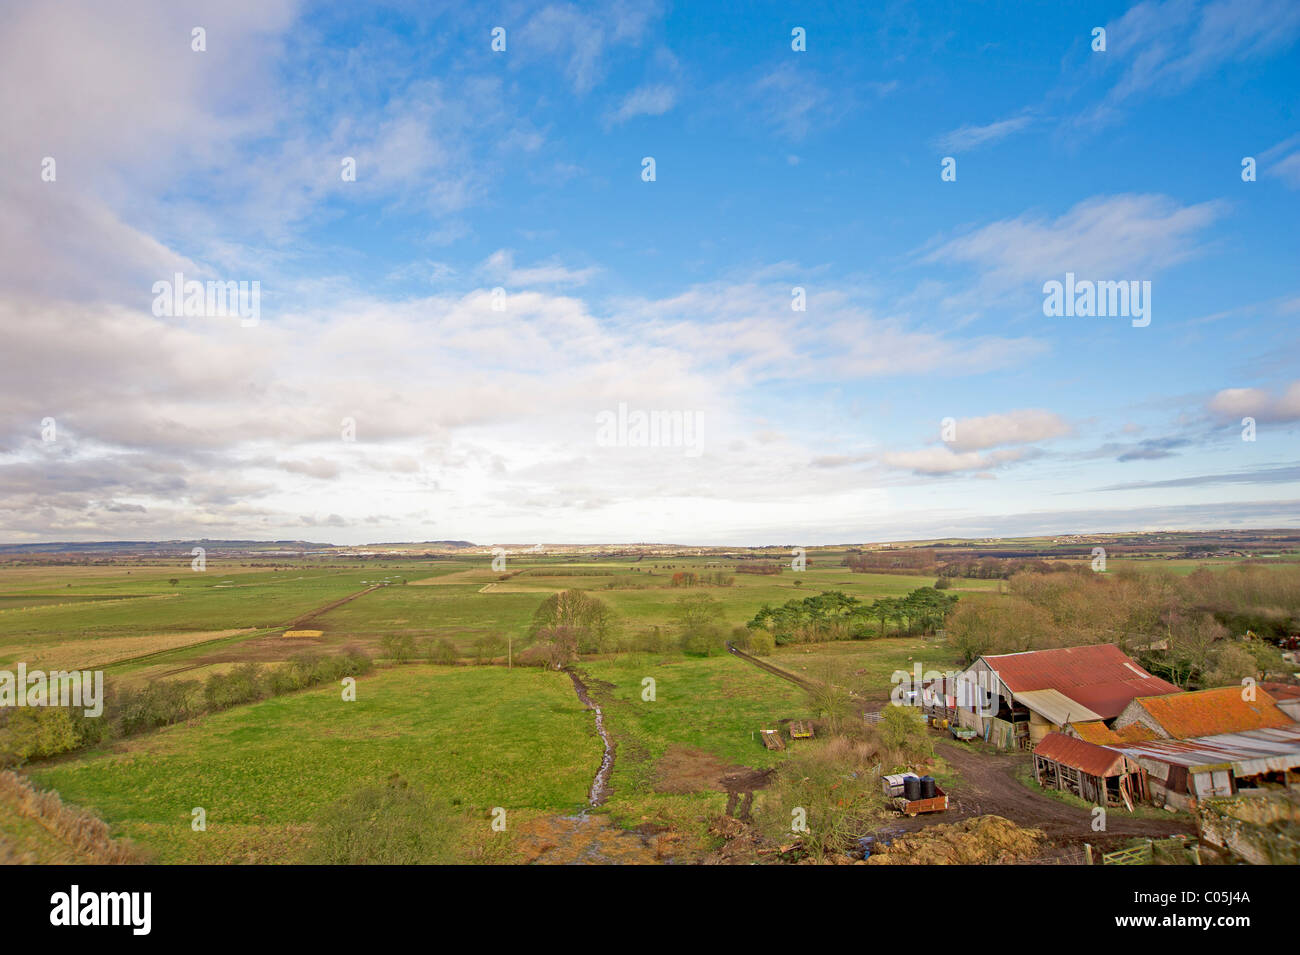 Landscape view over fields of a countryside farm Stock Photo